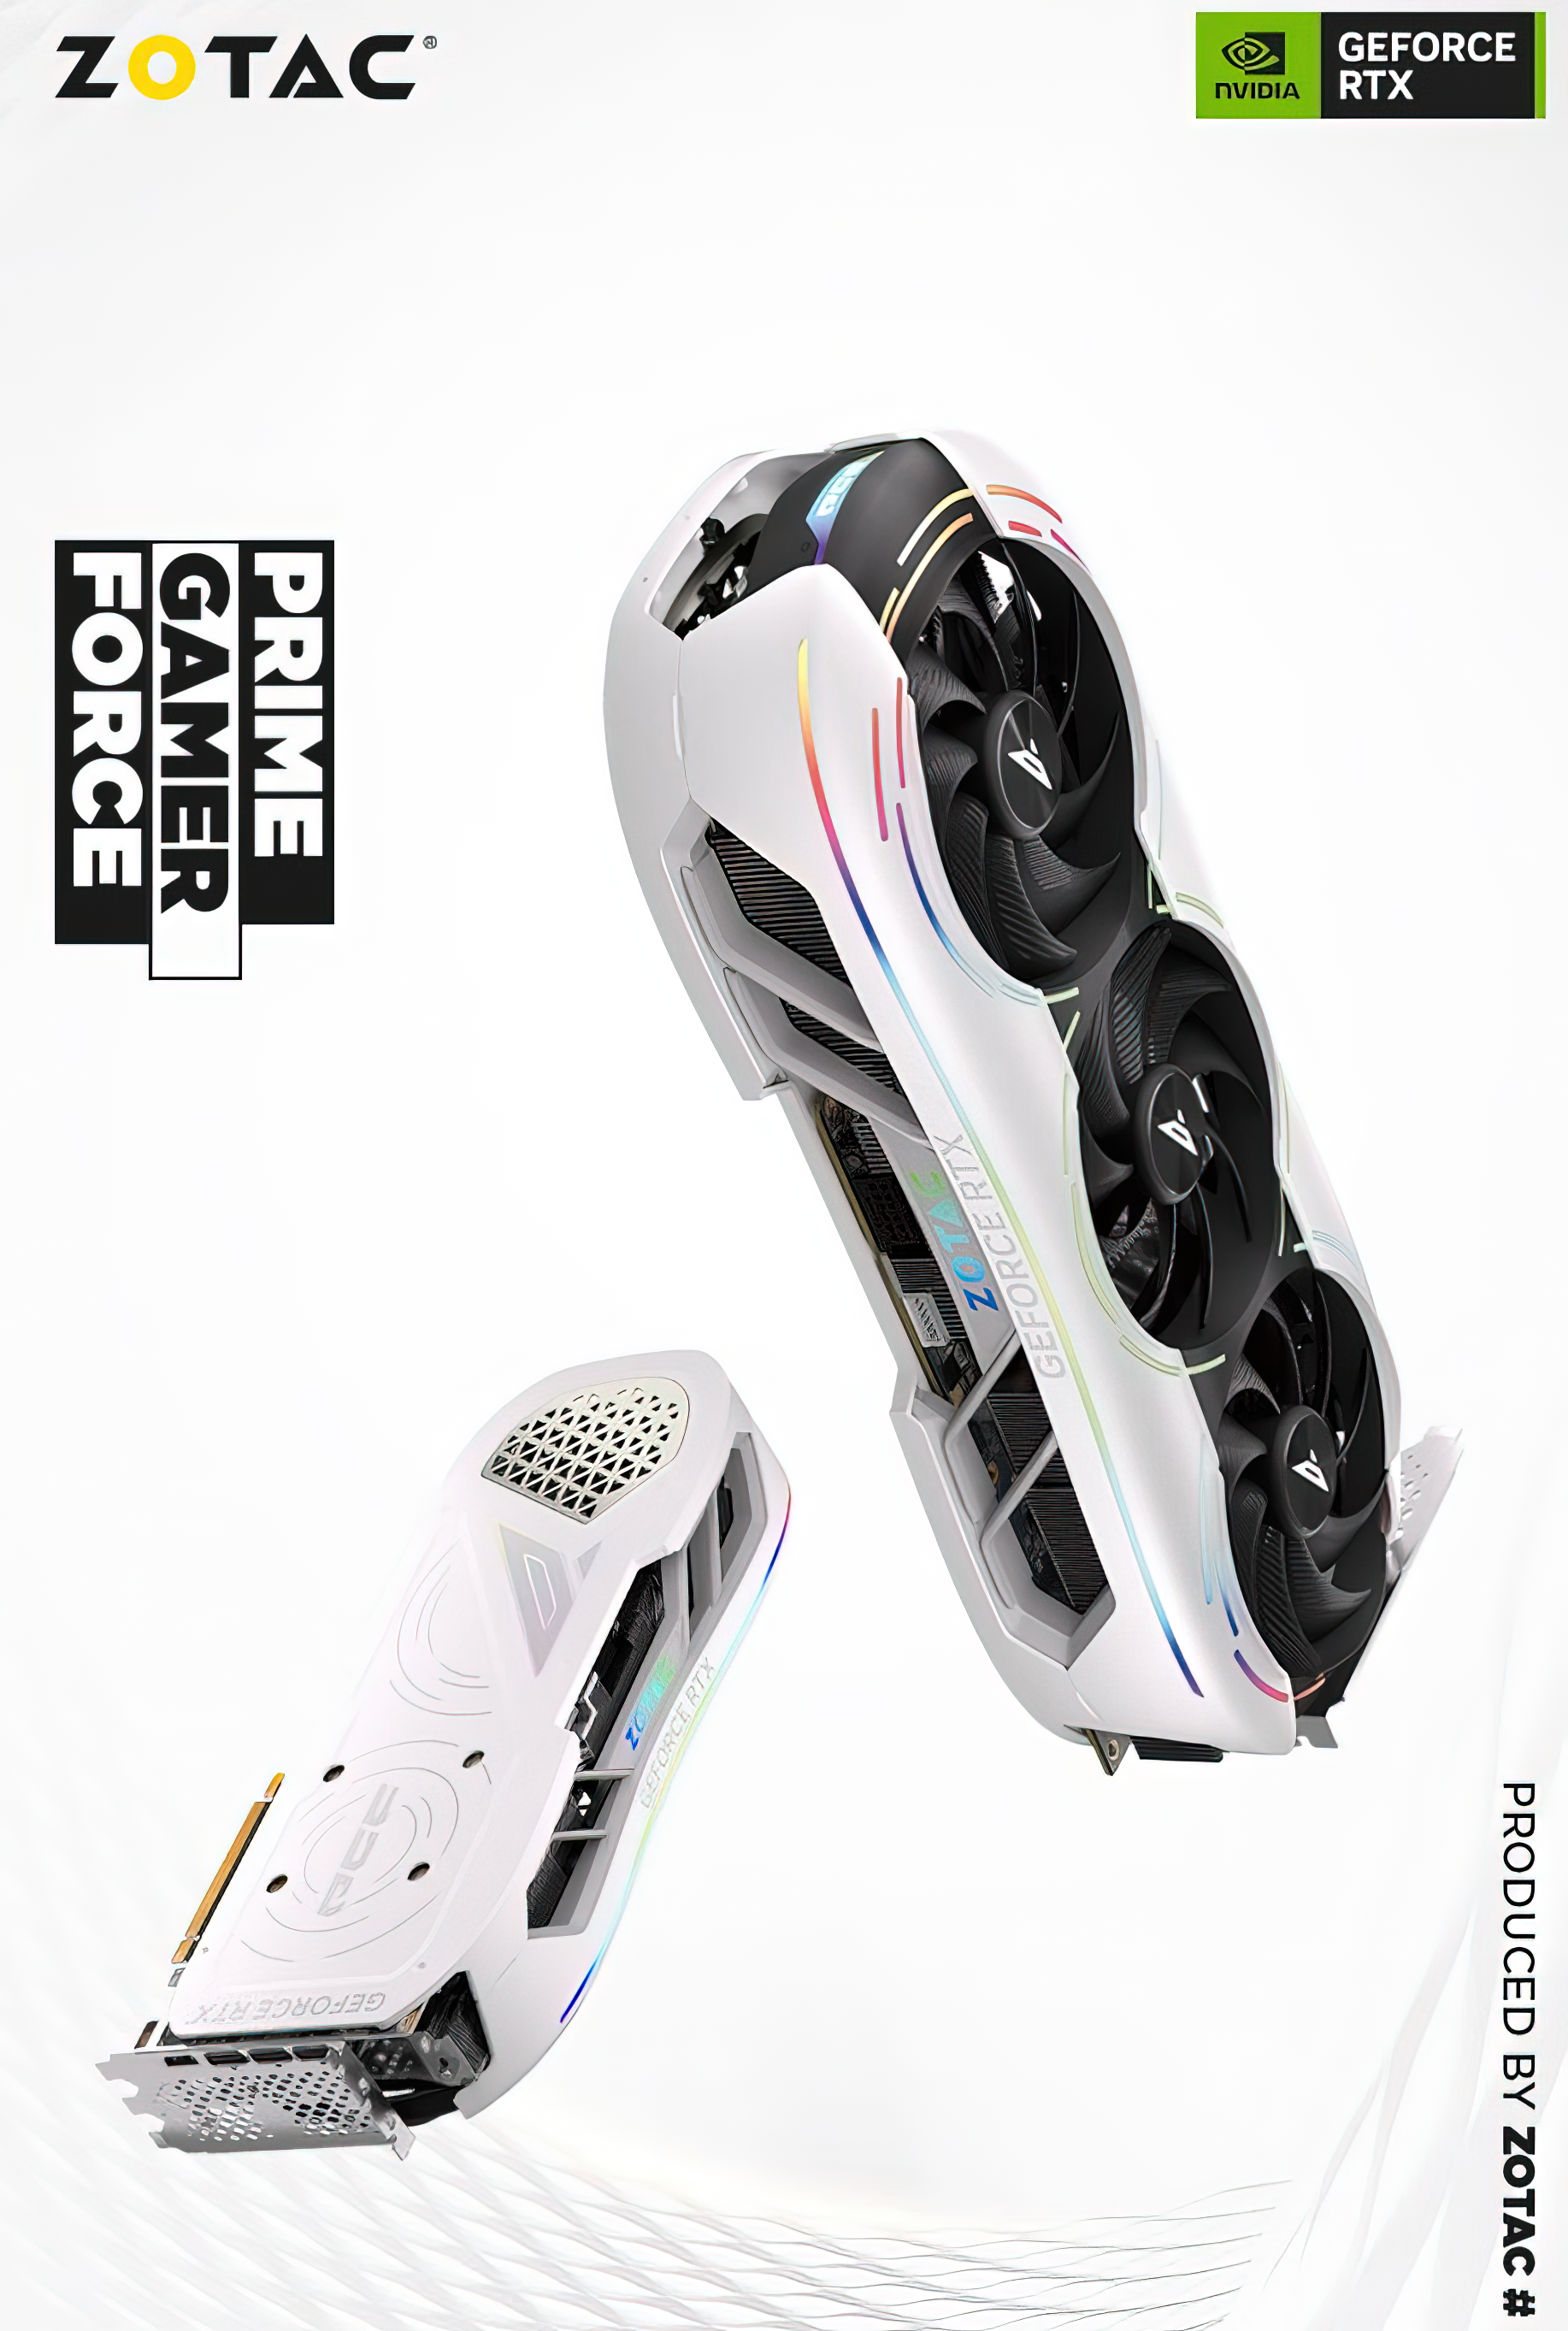 ZOTAC-GeForce-RTX-4090-PGF-Graphics-Card-_3-g-low_res-scale-2_00x.png